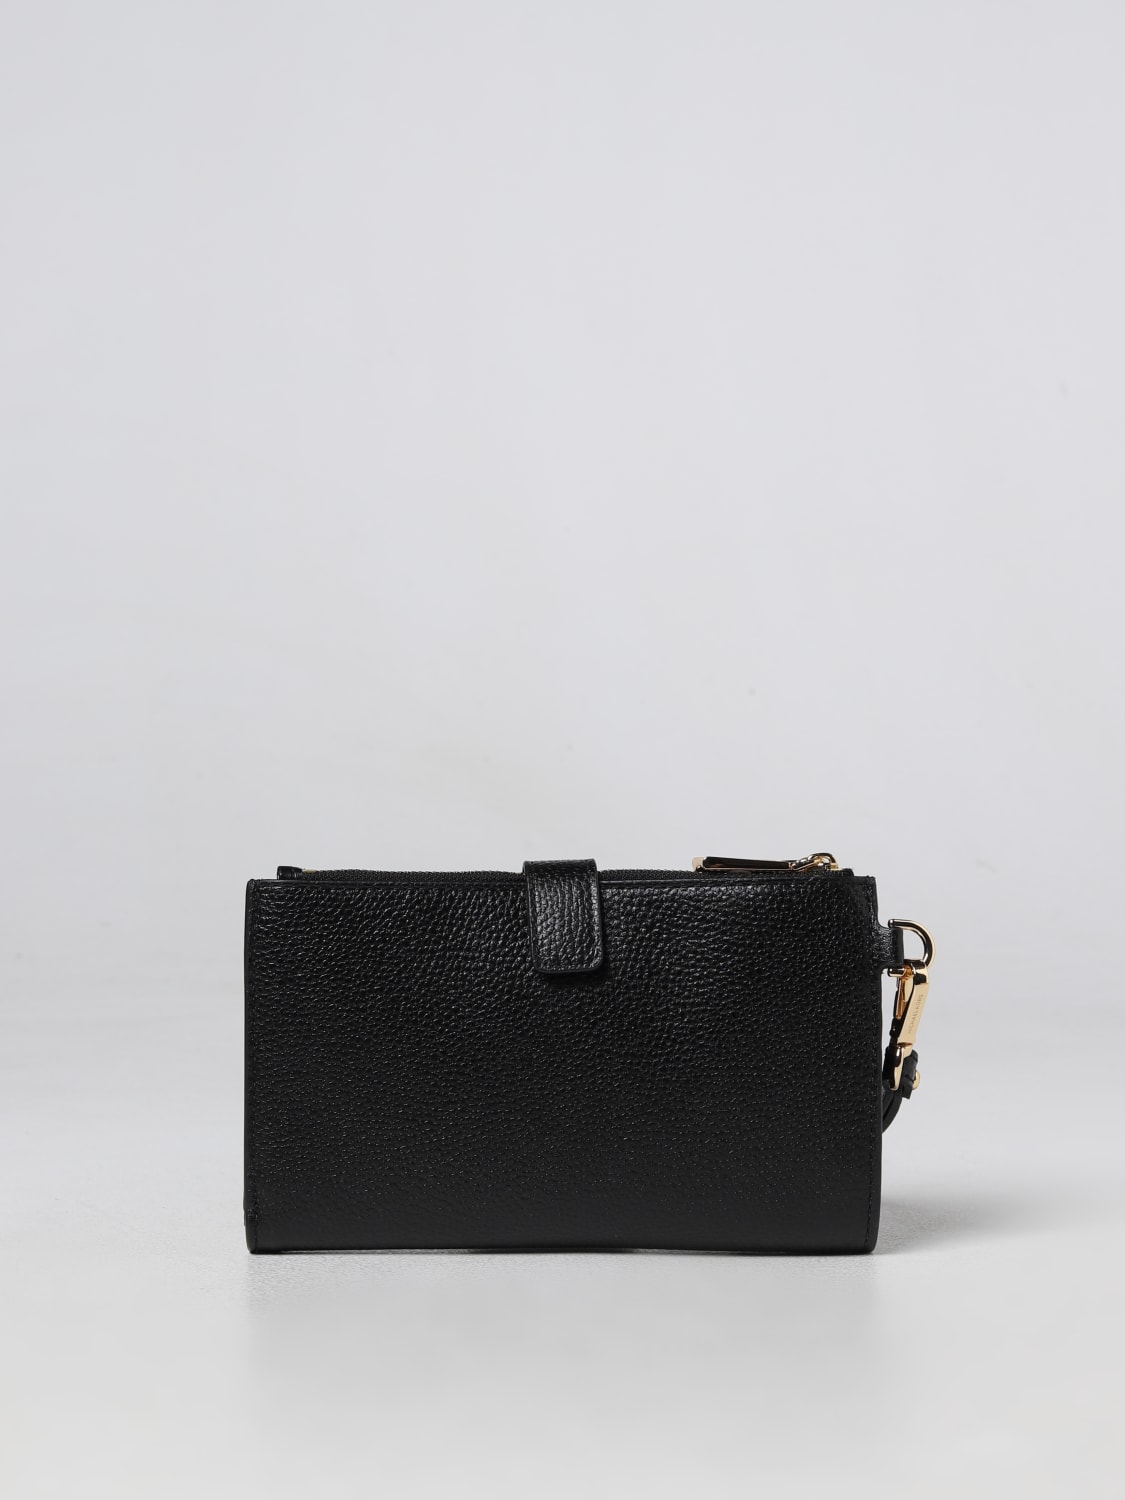 Michael Michael Kors Wallet in Grained Leather